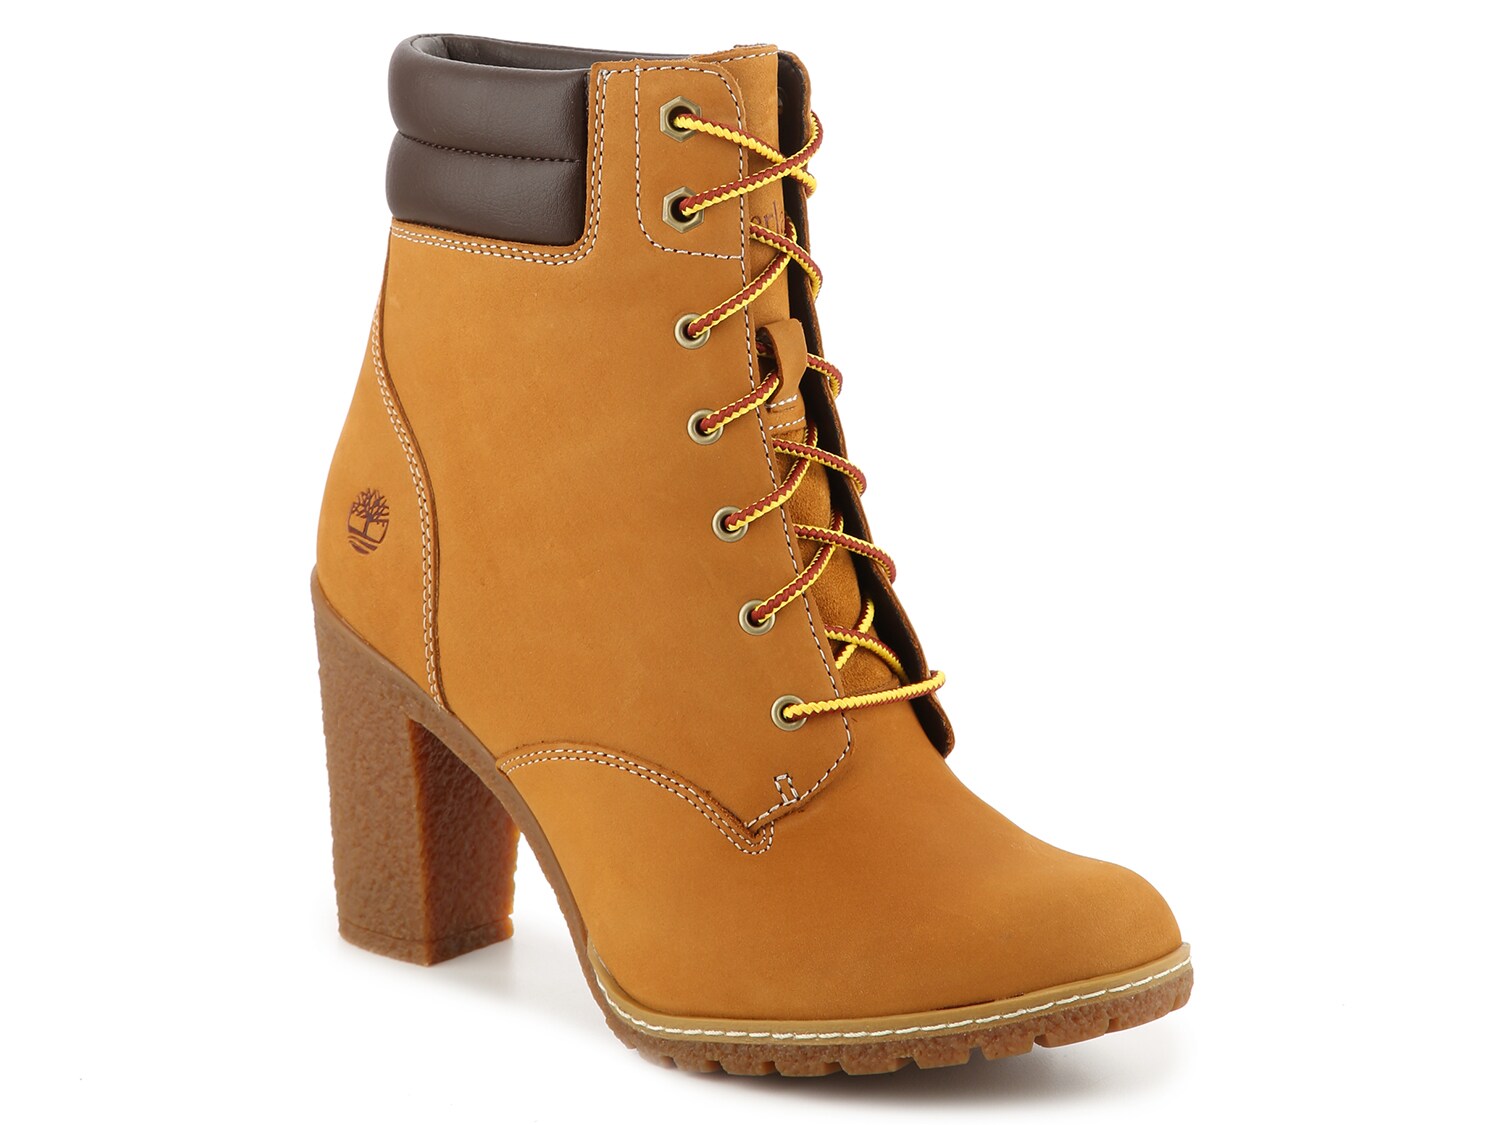 Timberland Shoes, Boots \u0026 Booties | DSW